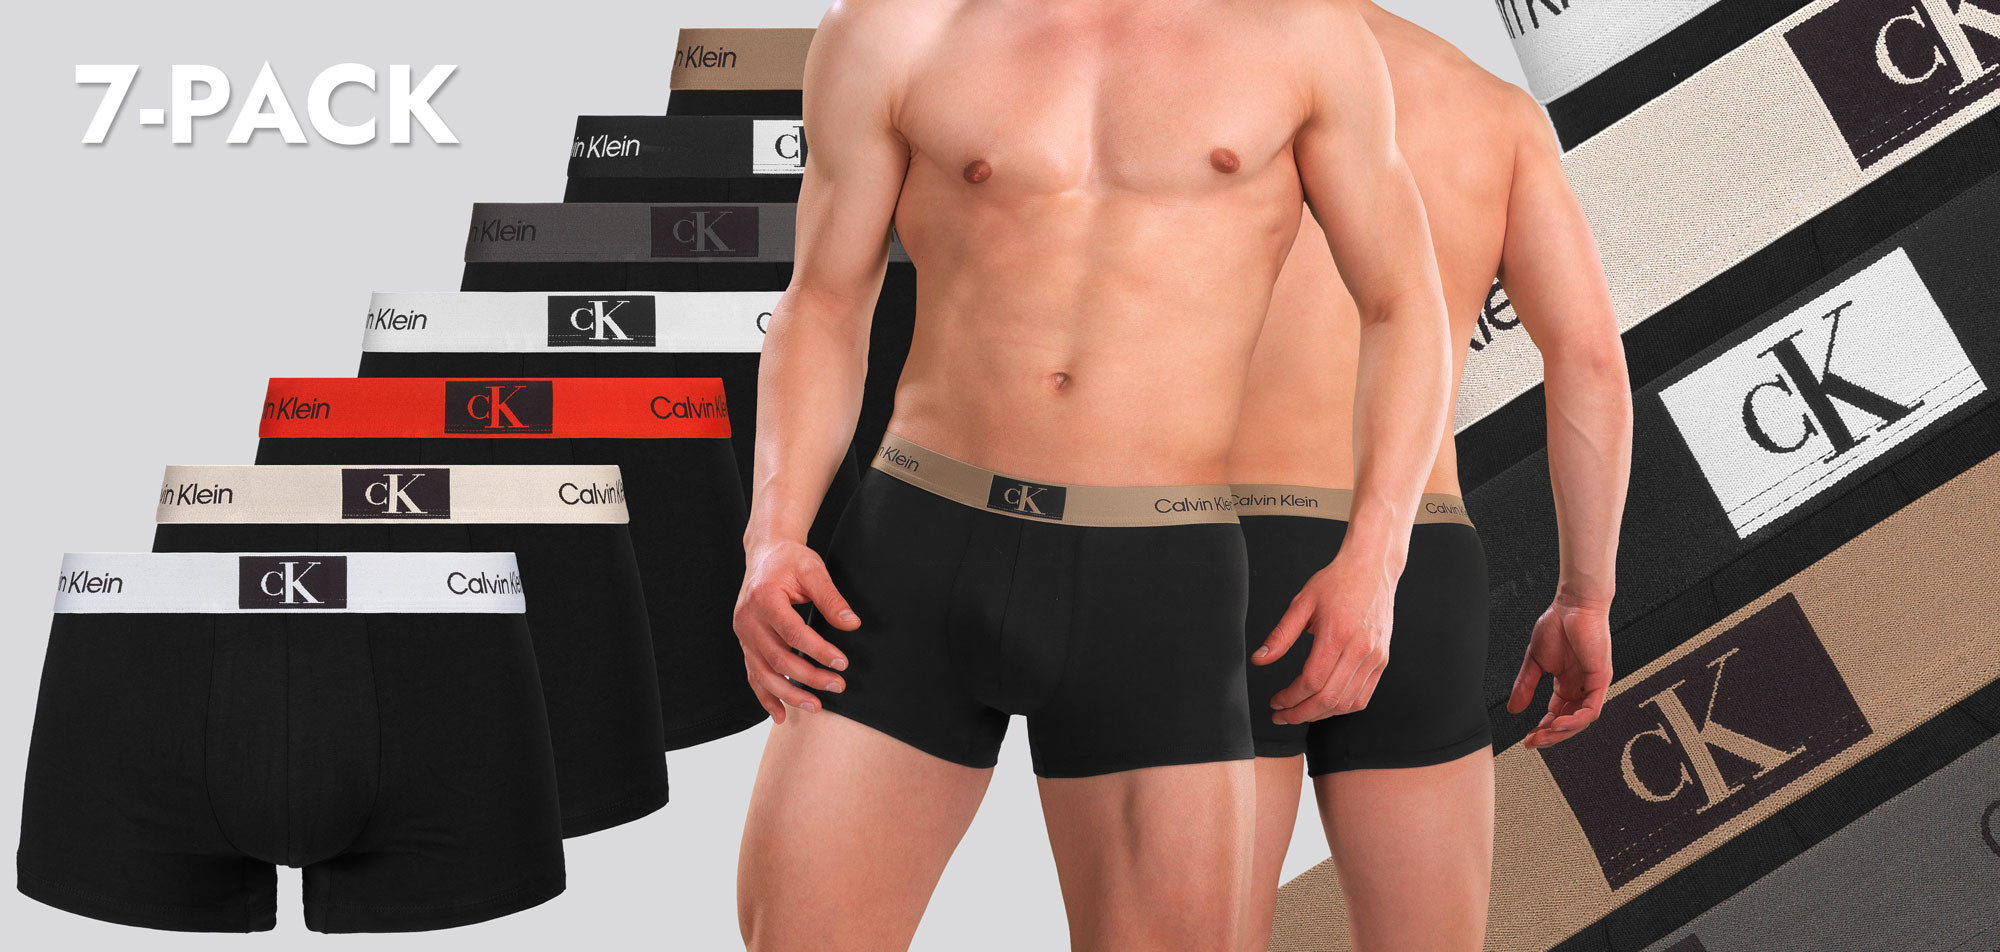 Calvin Klein Trunk 7-Pack NB3582A 1996, color Nee